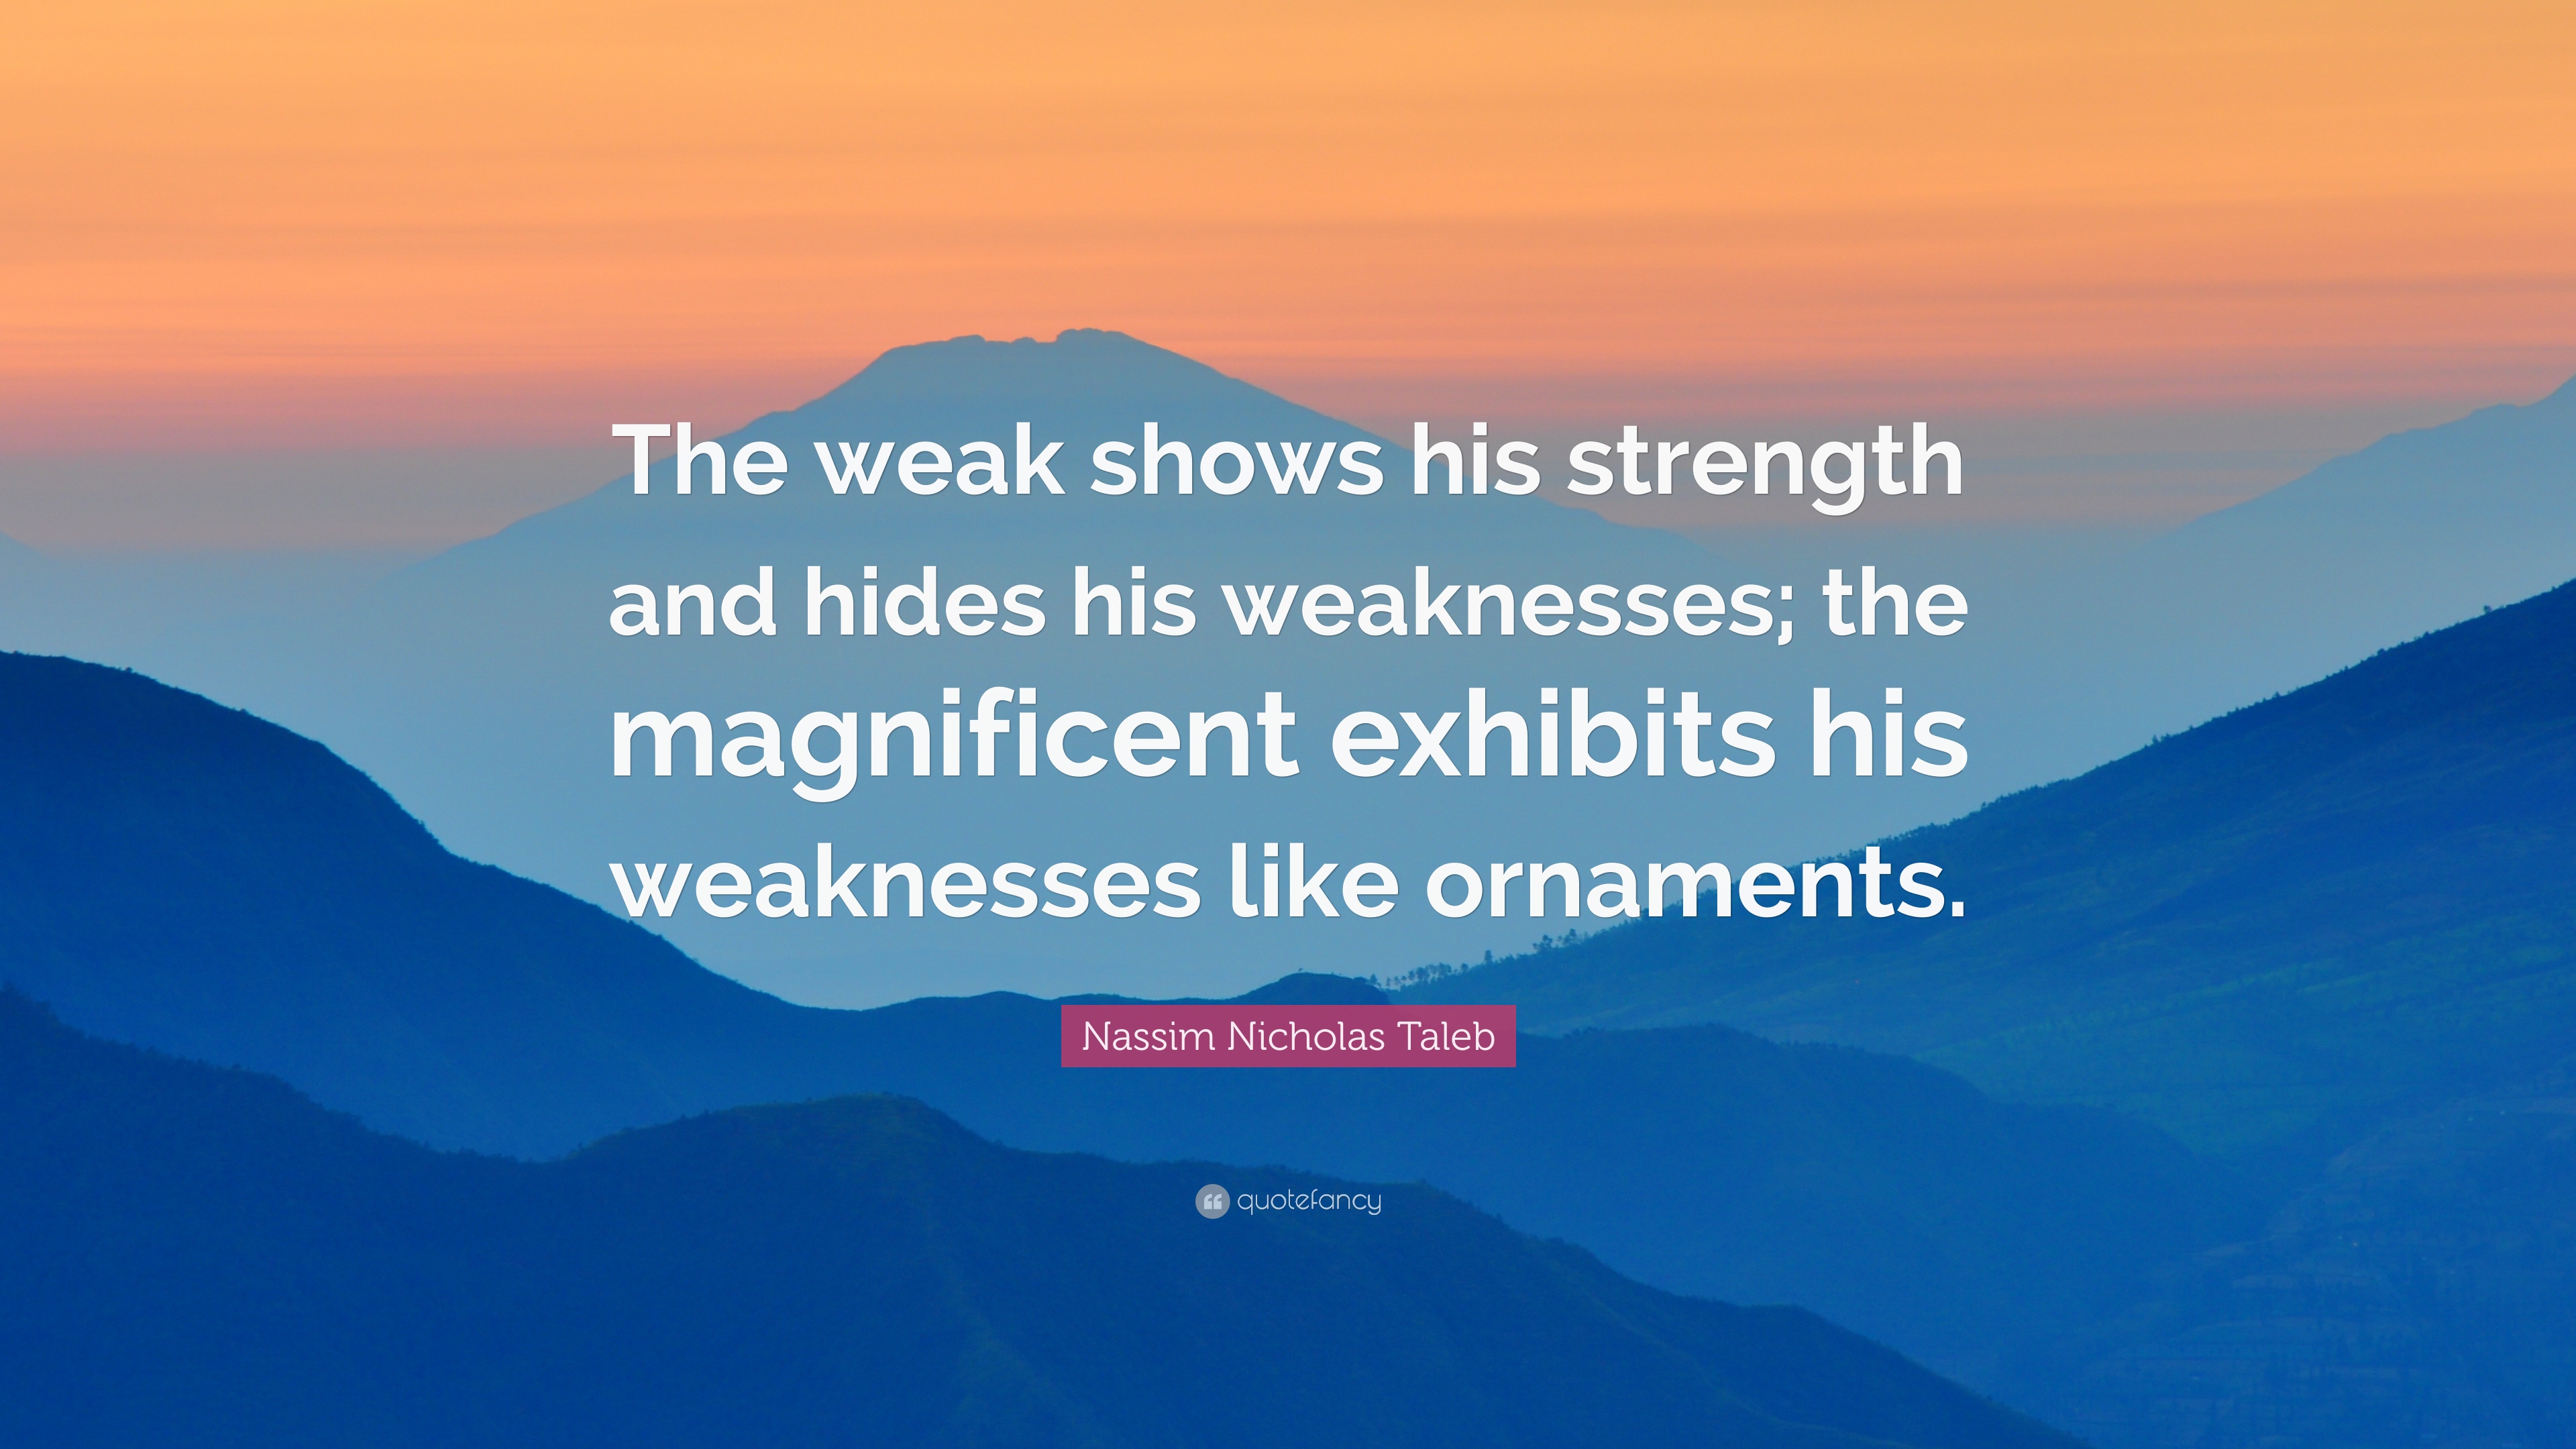 Nassim Nicholas Taleb Quote: “The weak shows his strength and hides ...